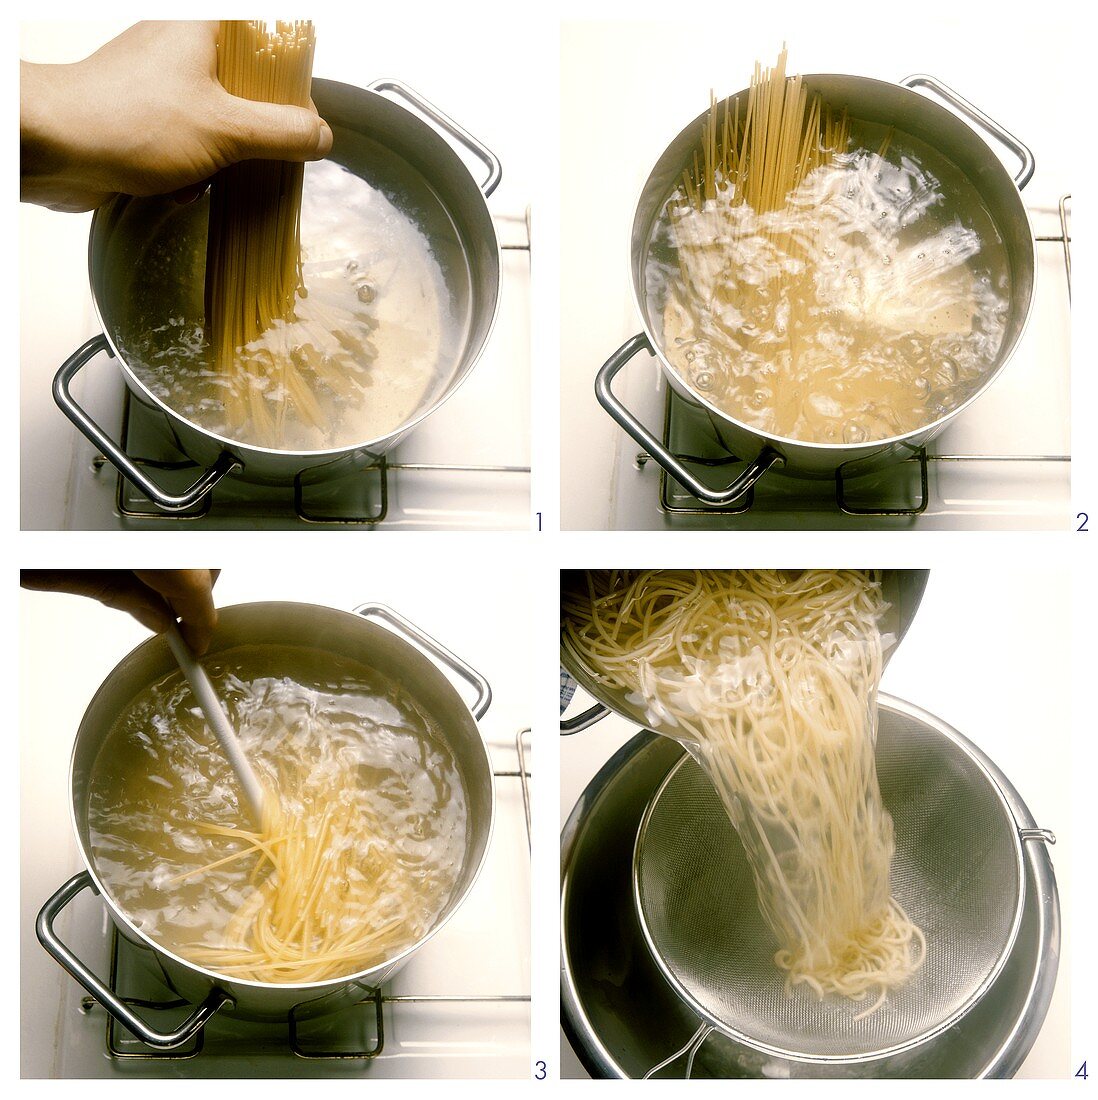 Cooking and draining spaghetti